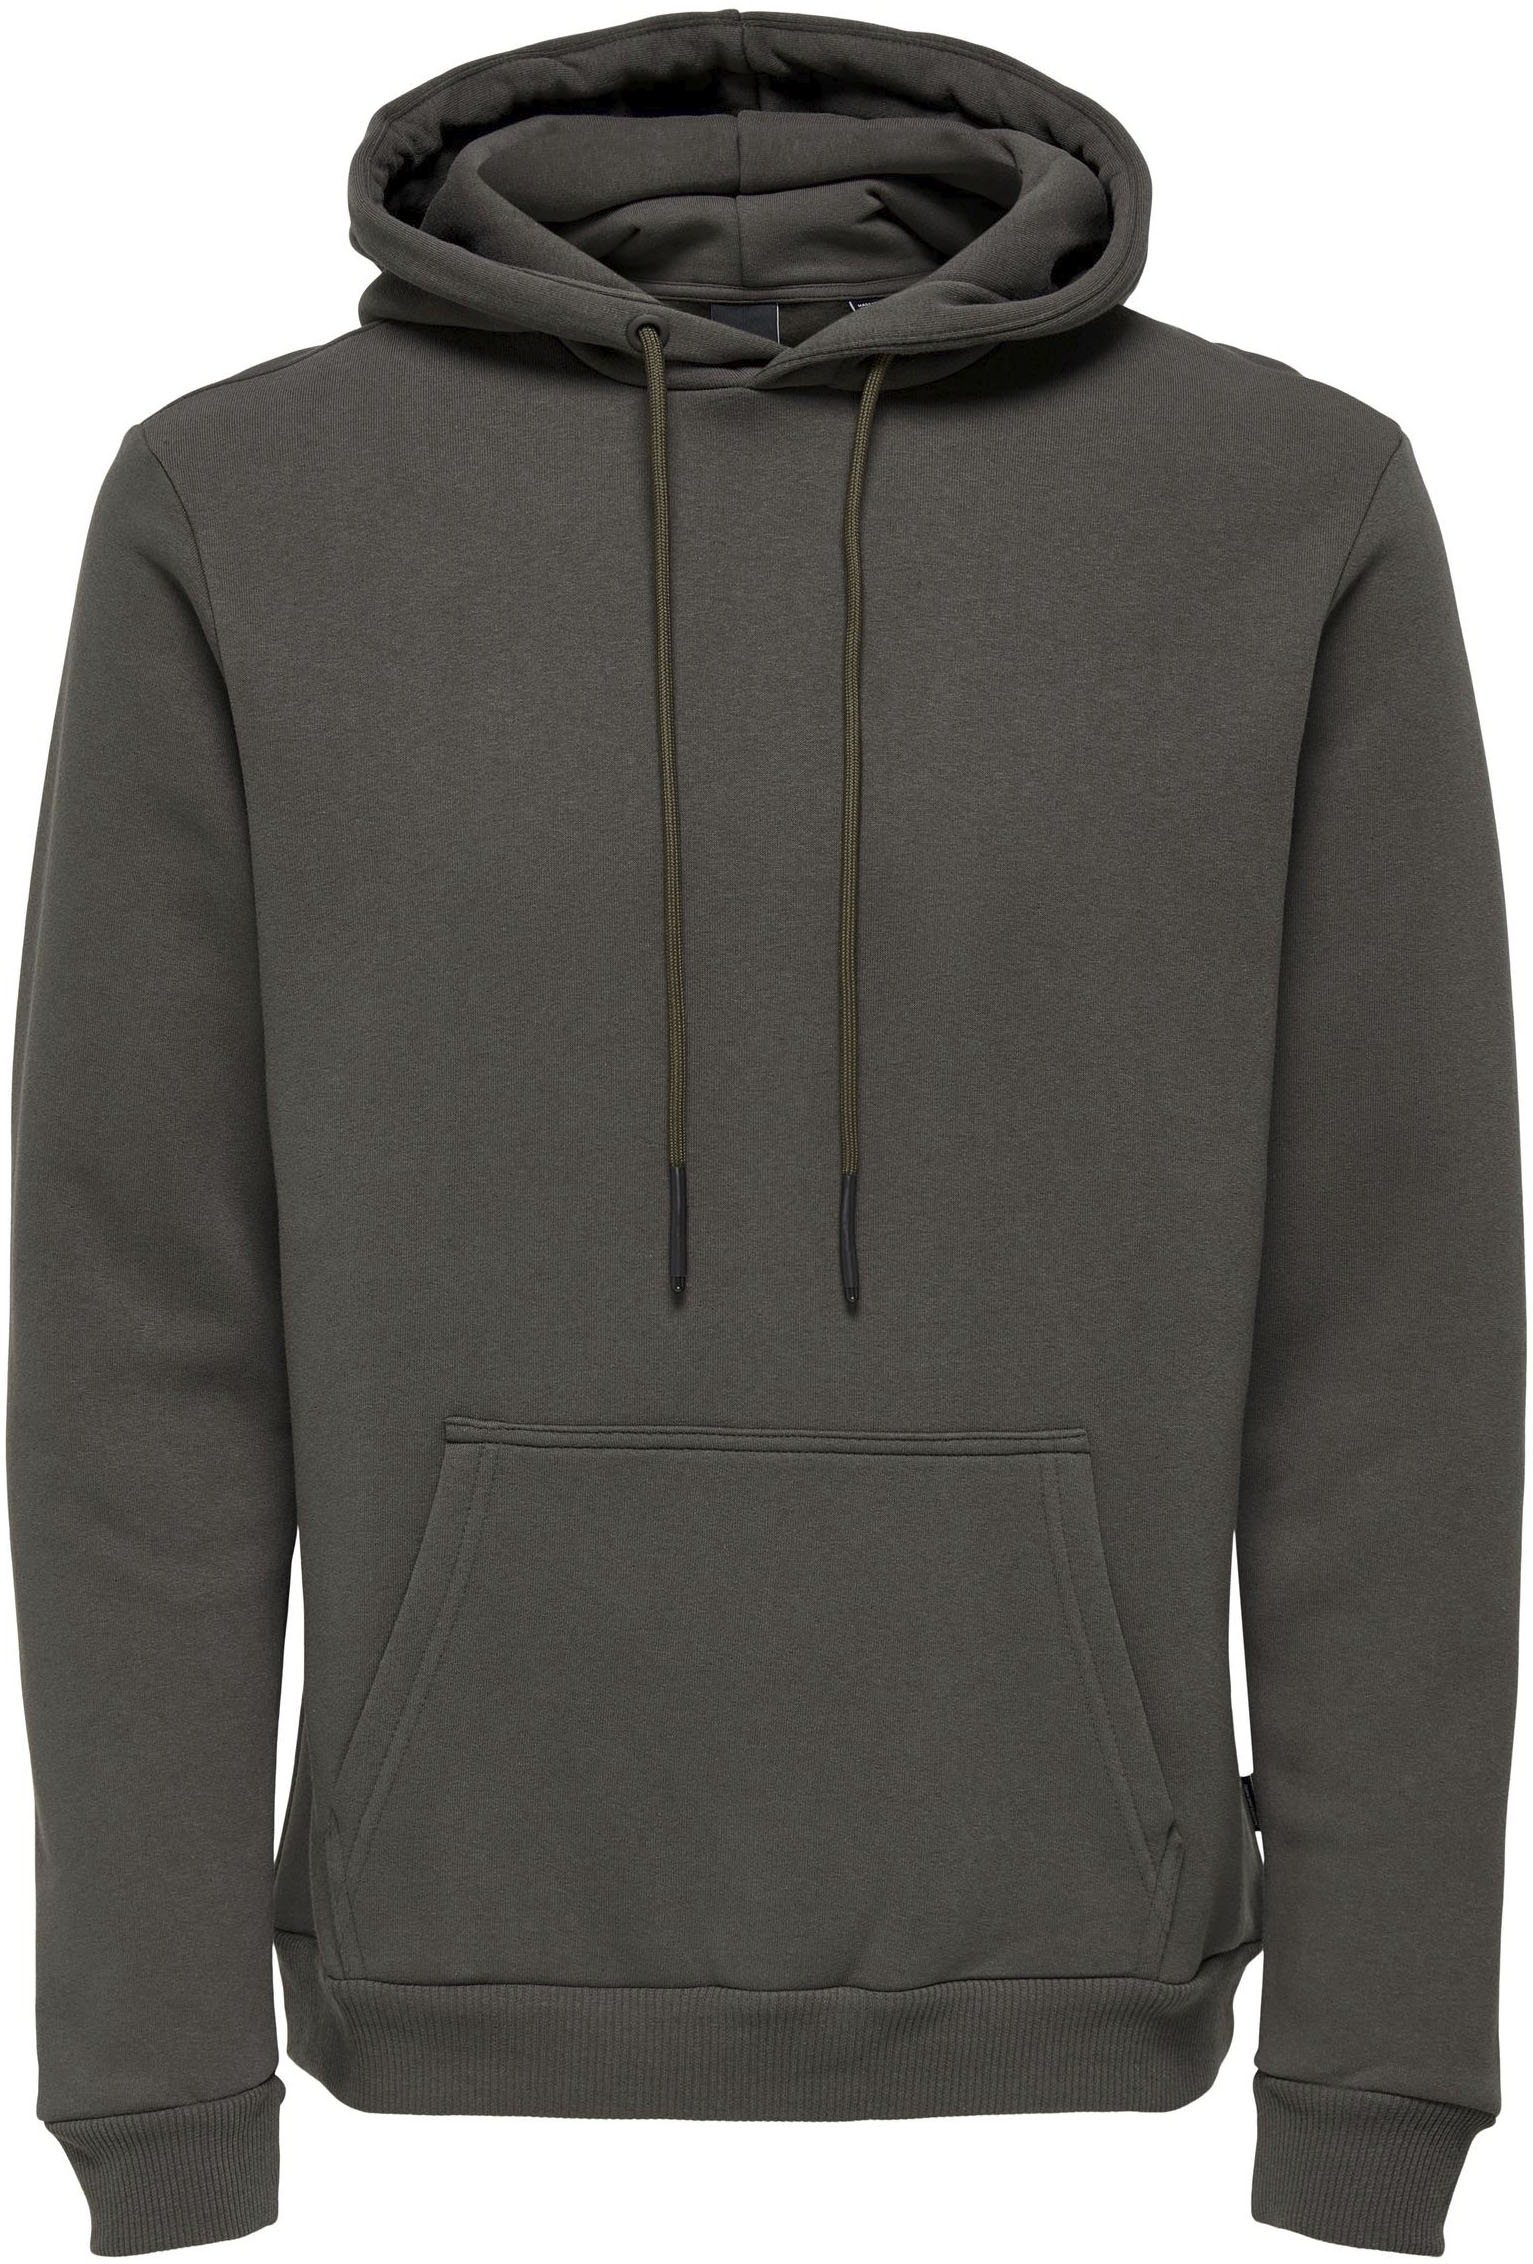 ONLY & SONS Kapuzensweatshirt »CERES LIFE HOODIE SWEAT« von Only & Sons